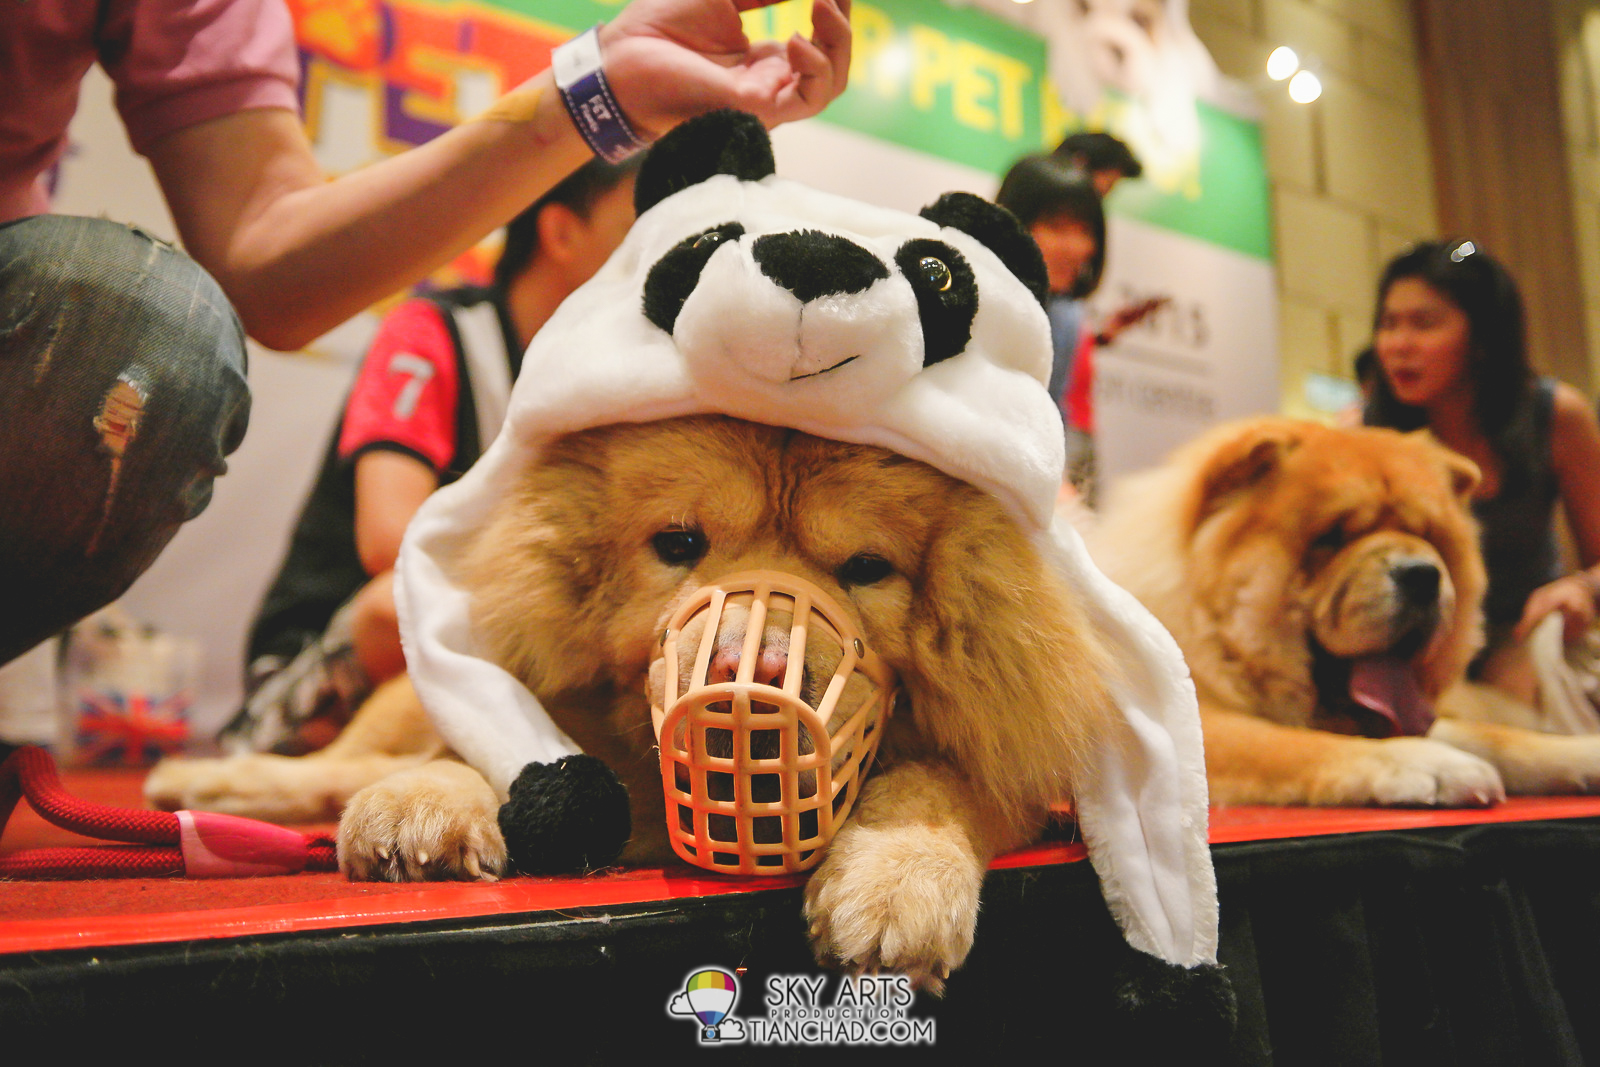 I wonder why this Chow Chow need to has his mouth covered like Bane. He seems sad